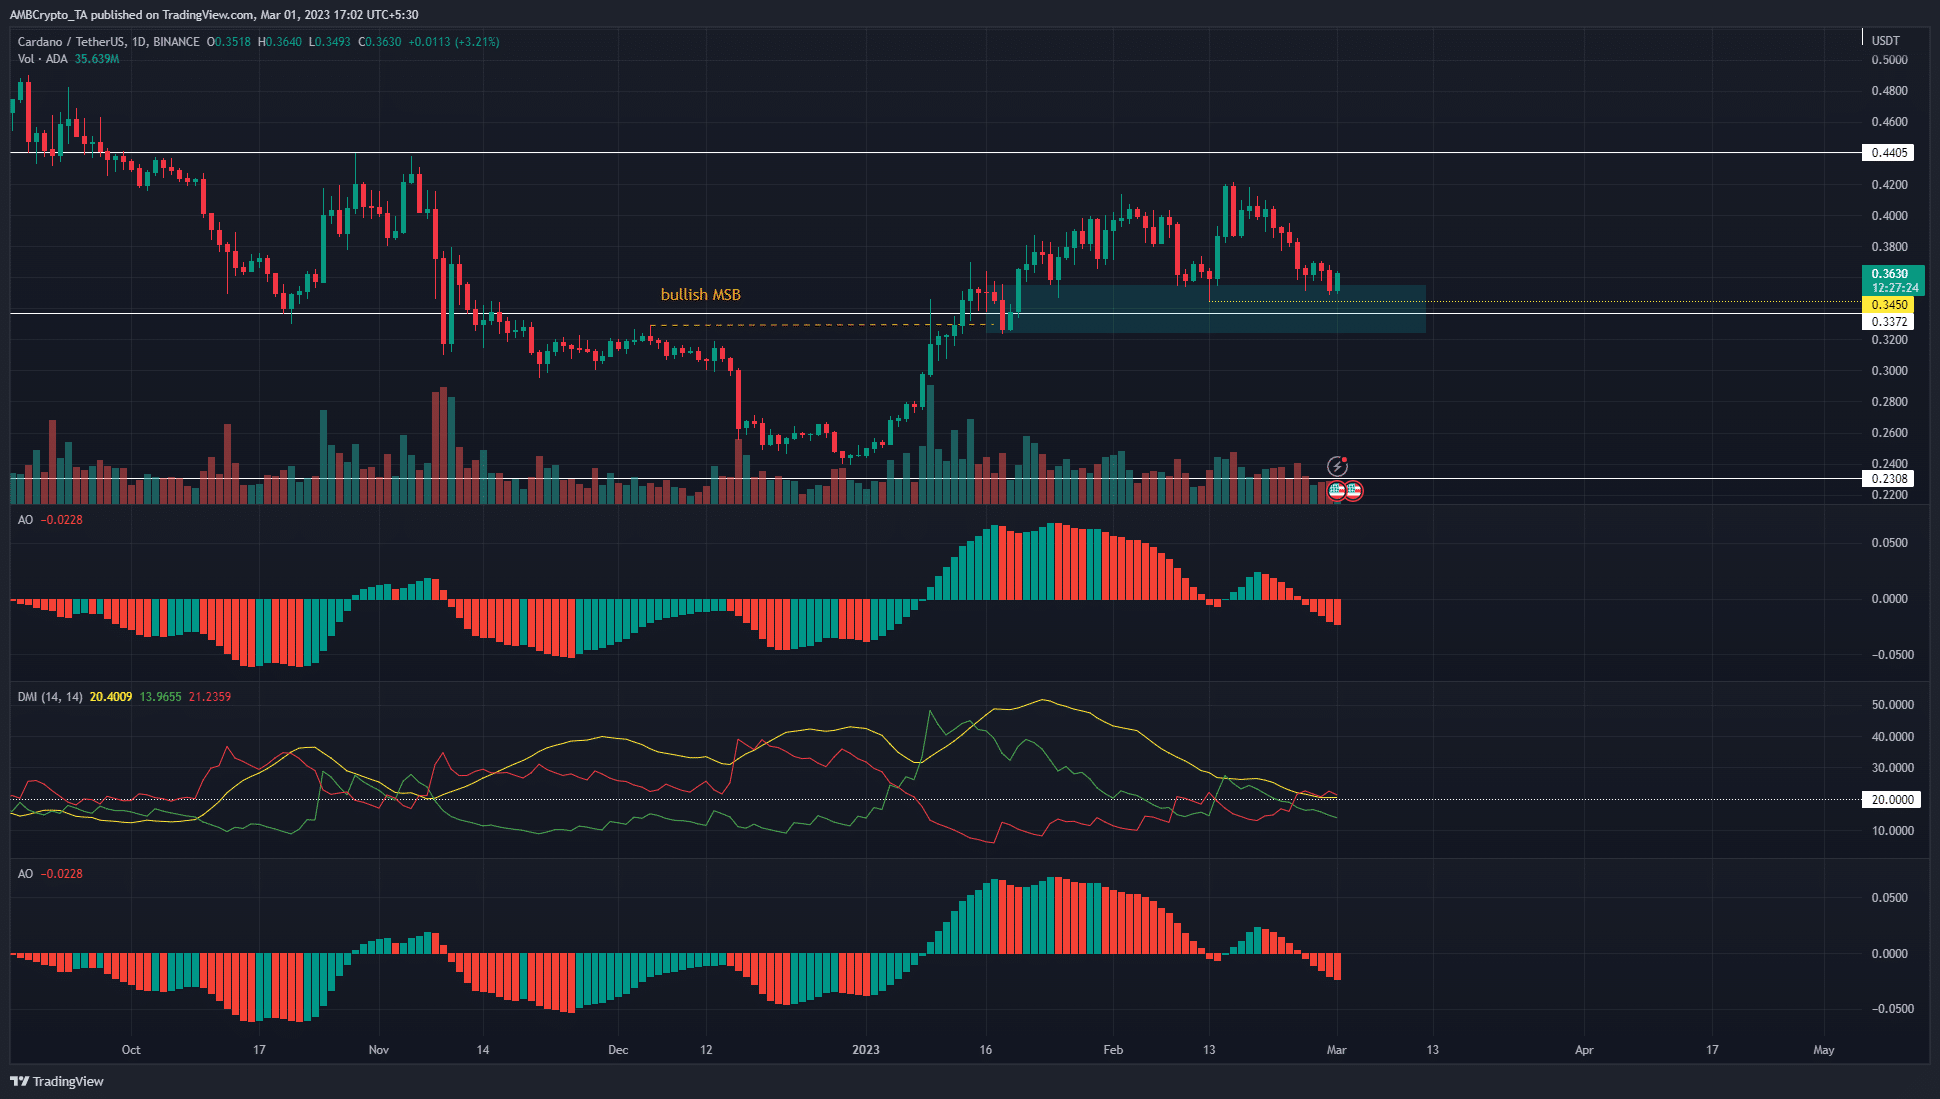 Cardano bulls still in control but their hold could be weakening